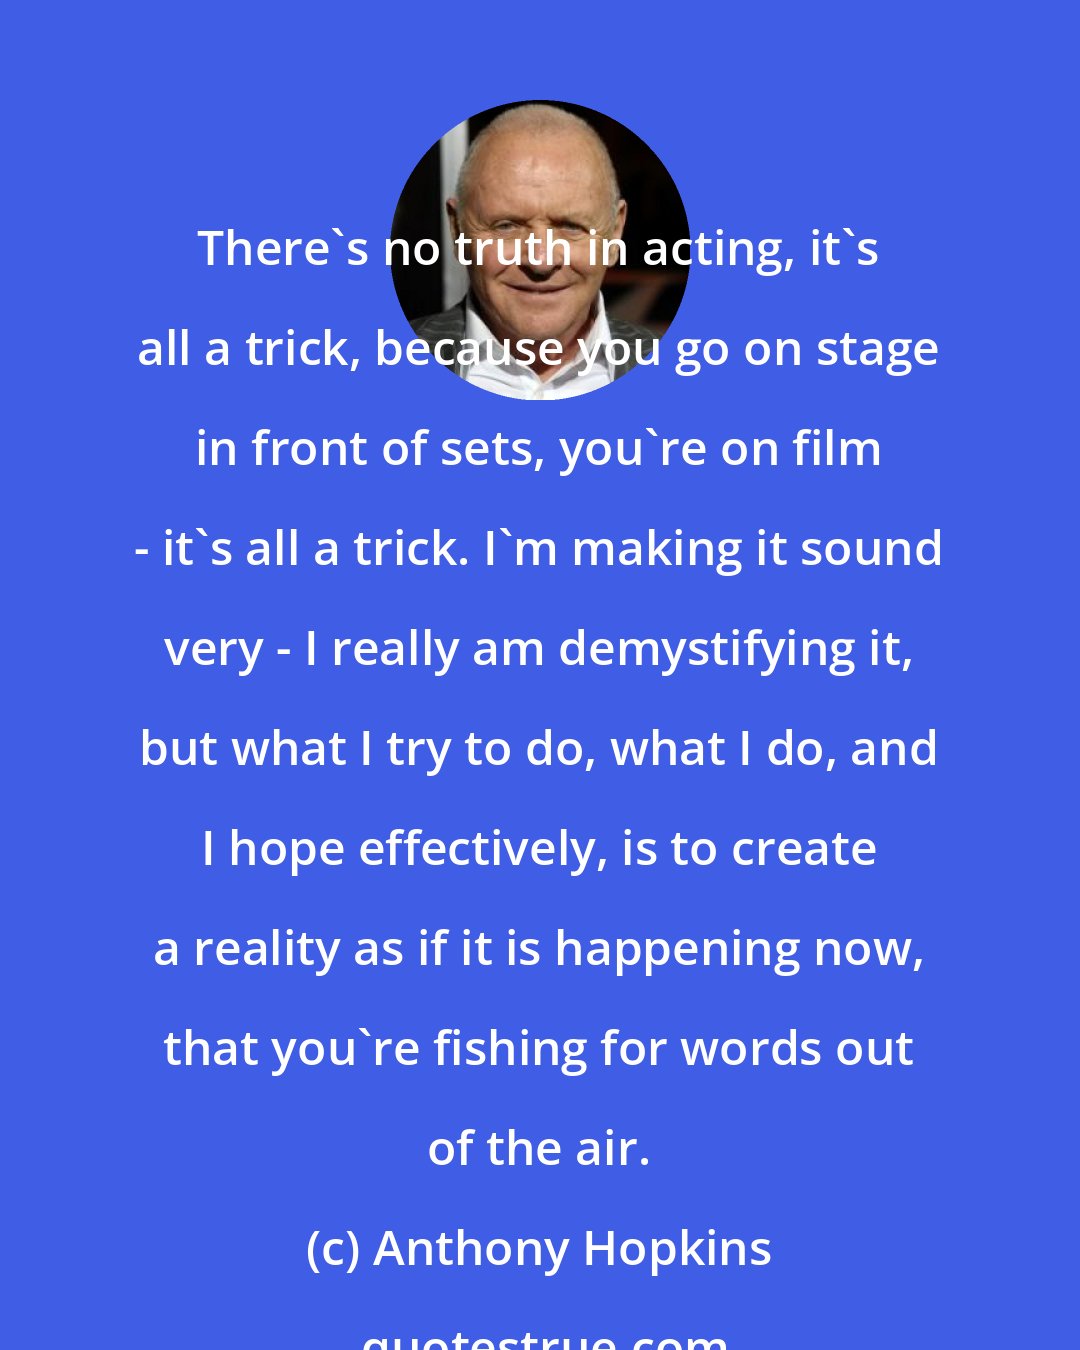 Anthony Hopkins: There's no truth in acting, it's all a trick, because you go on stage in front of sets, you're on film - it's all a trick. I'm making it sound very - I really am demystifying it, but what I try to do, what I do, and I hope effectively, is to create a reality as if it is happening now, that you're fishing for words out of the air.